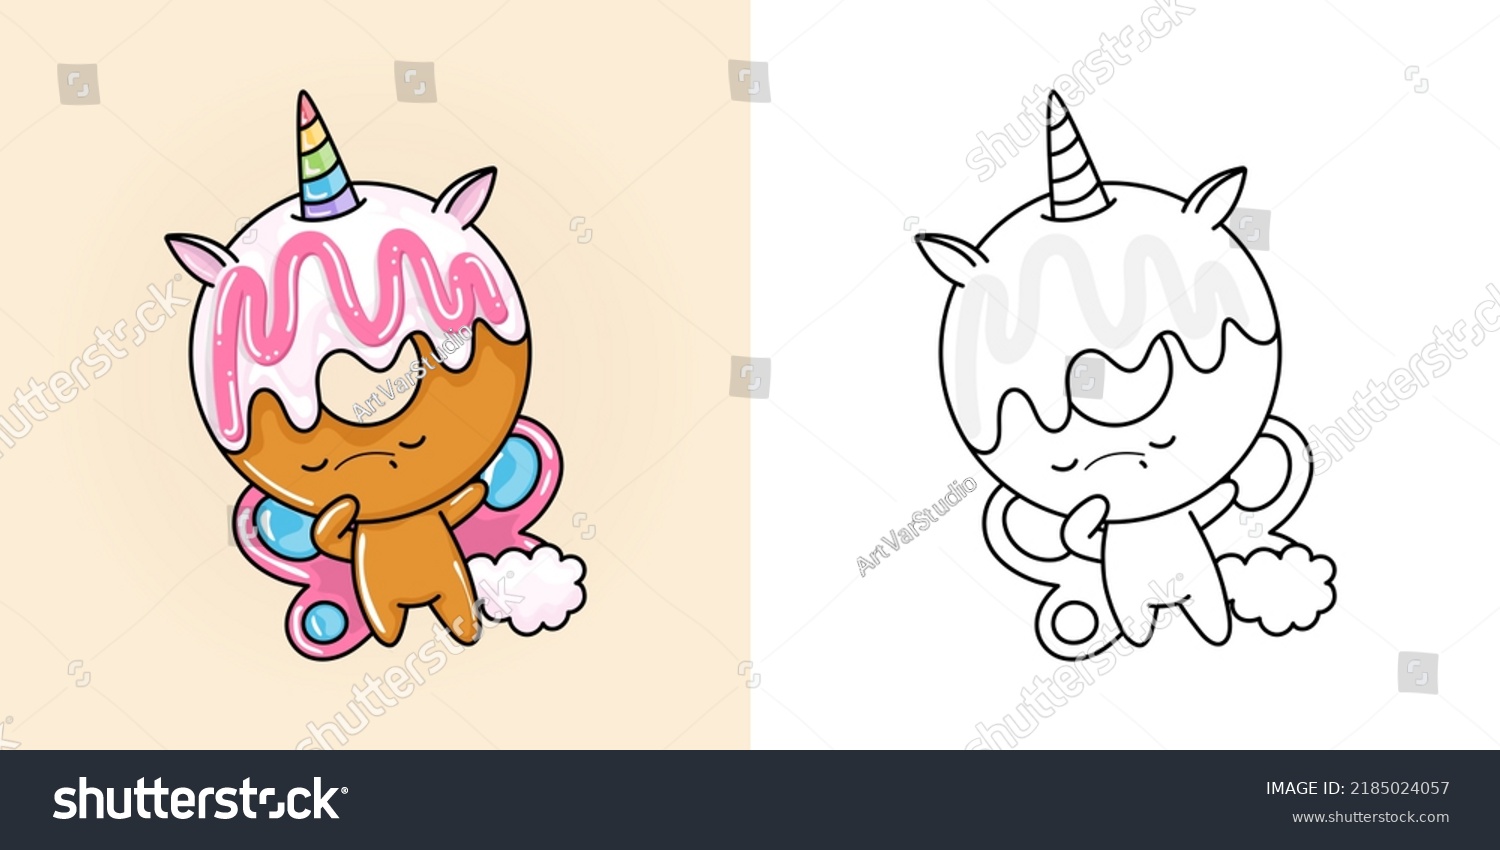 SVG of Cute Unicorn Clipart for Coloring Page and Illustration. Happy Clip Art Unicorn Donut. Vector Illustration of a Kawaii Animal for Stickers, Prints for Clothes, Baby Shower, Coloring Pages.
 svg